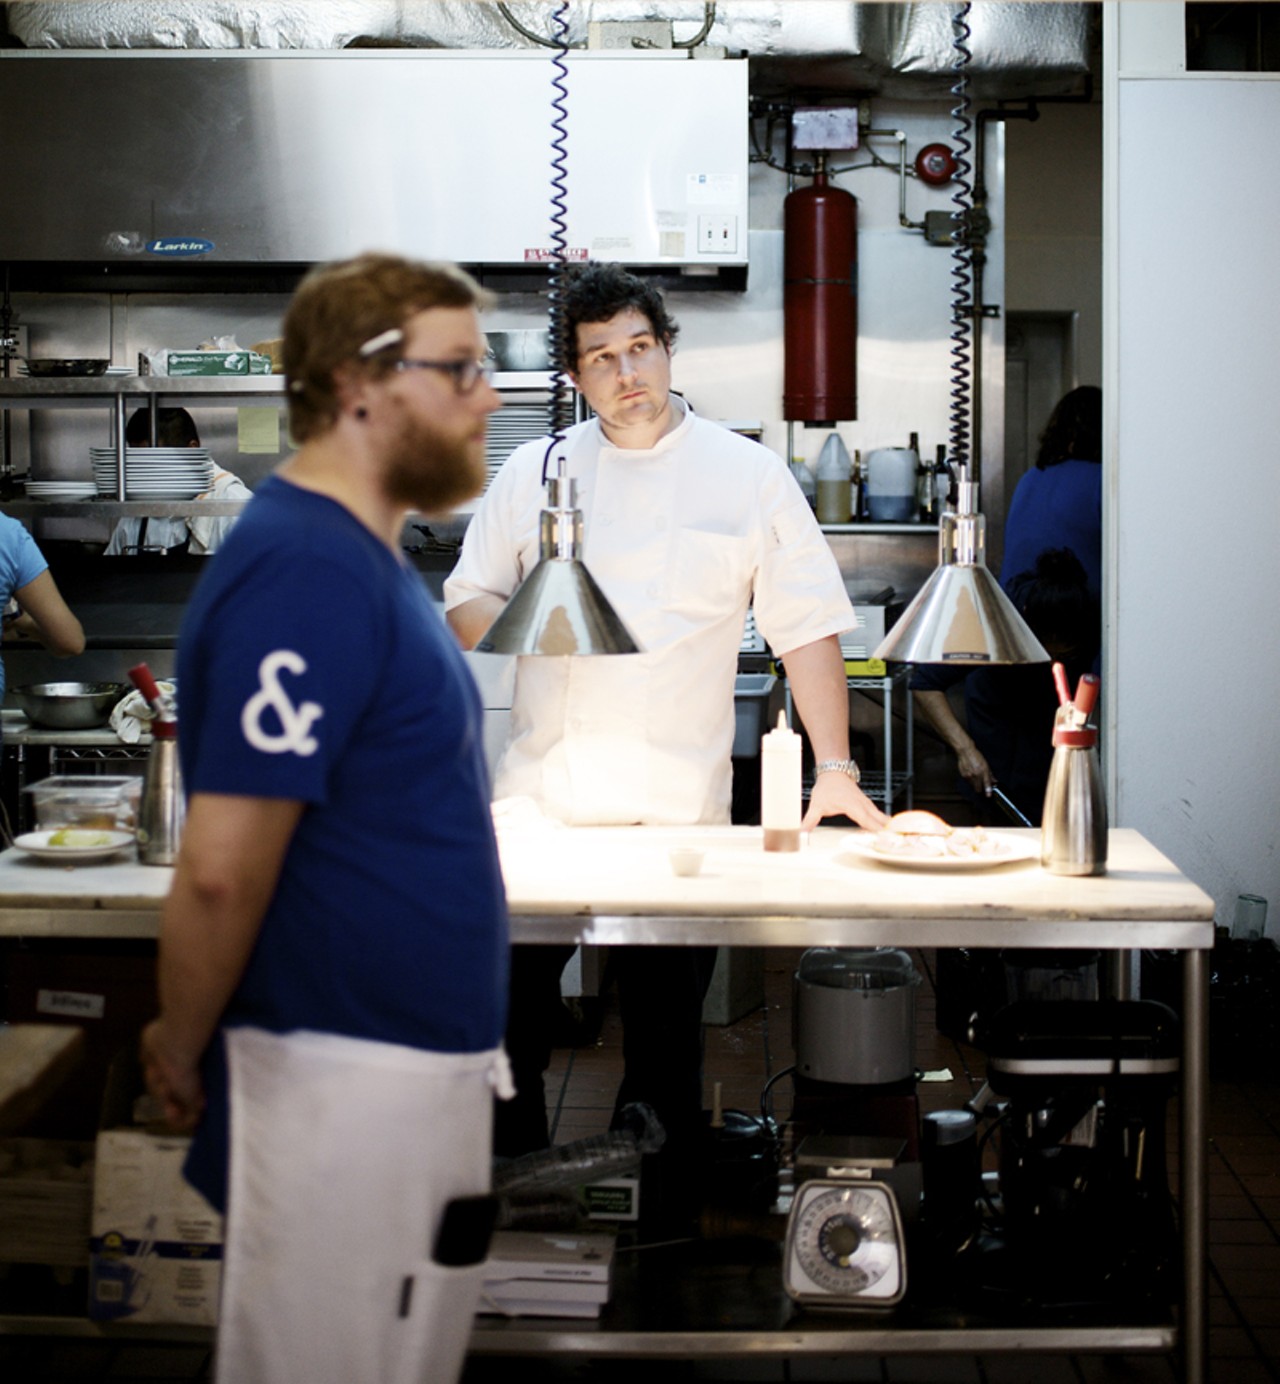 In the open kitchen is chef/owner Mike Randolph. Server Jeff Moll keeps an eye on his tables.